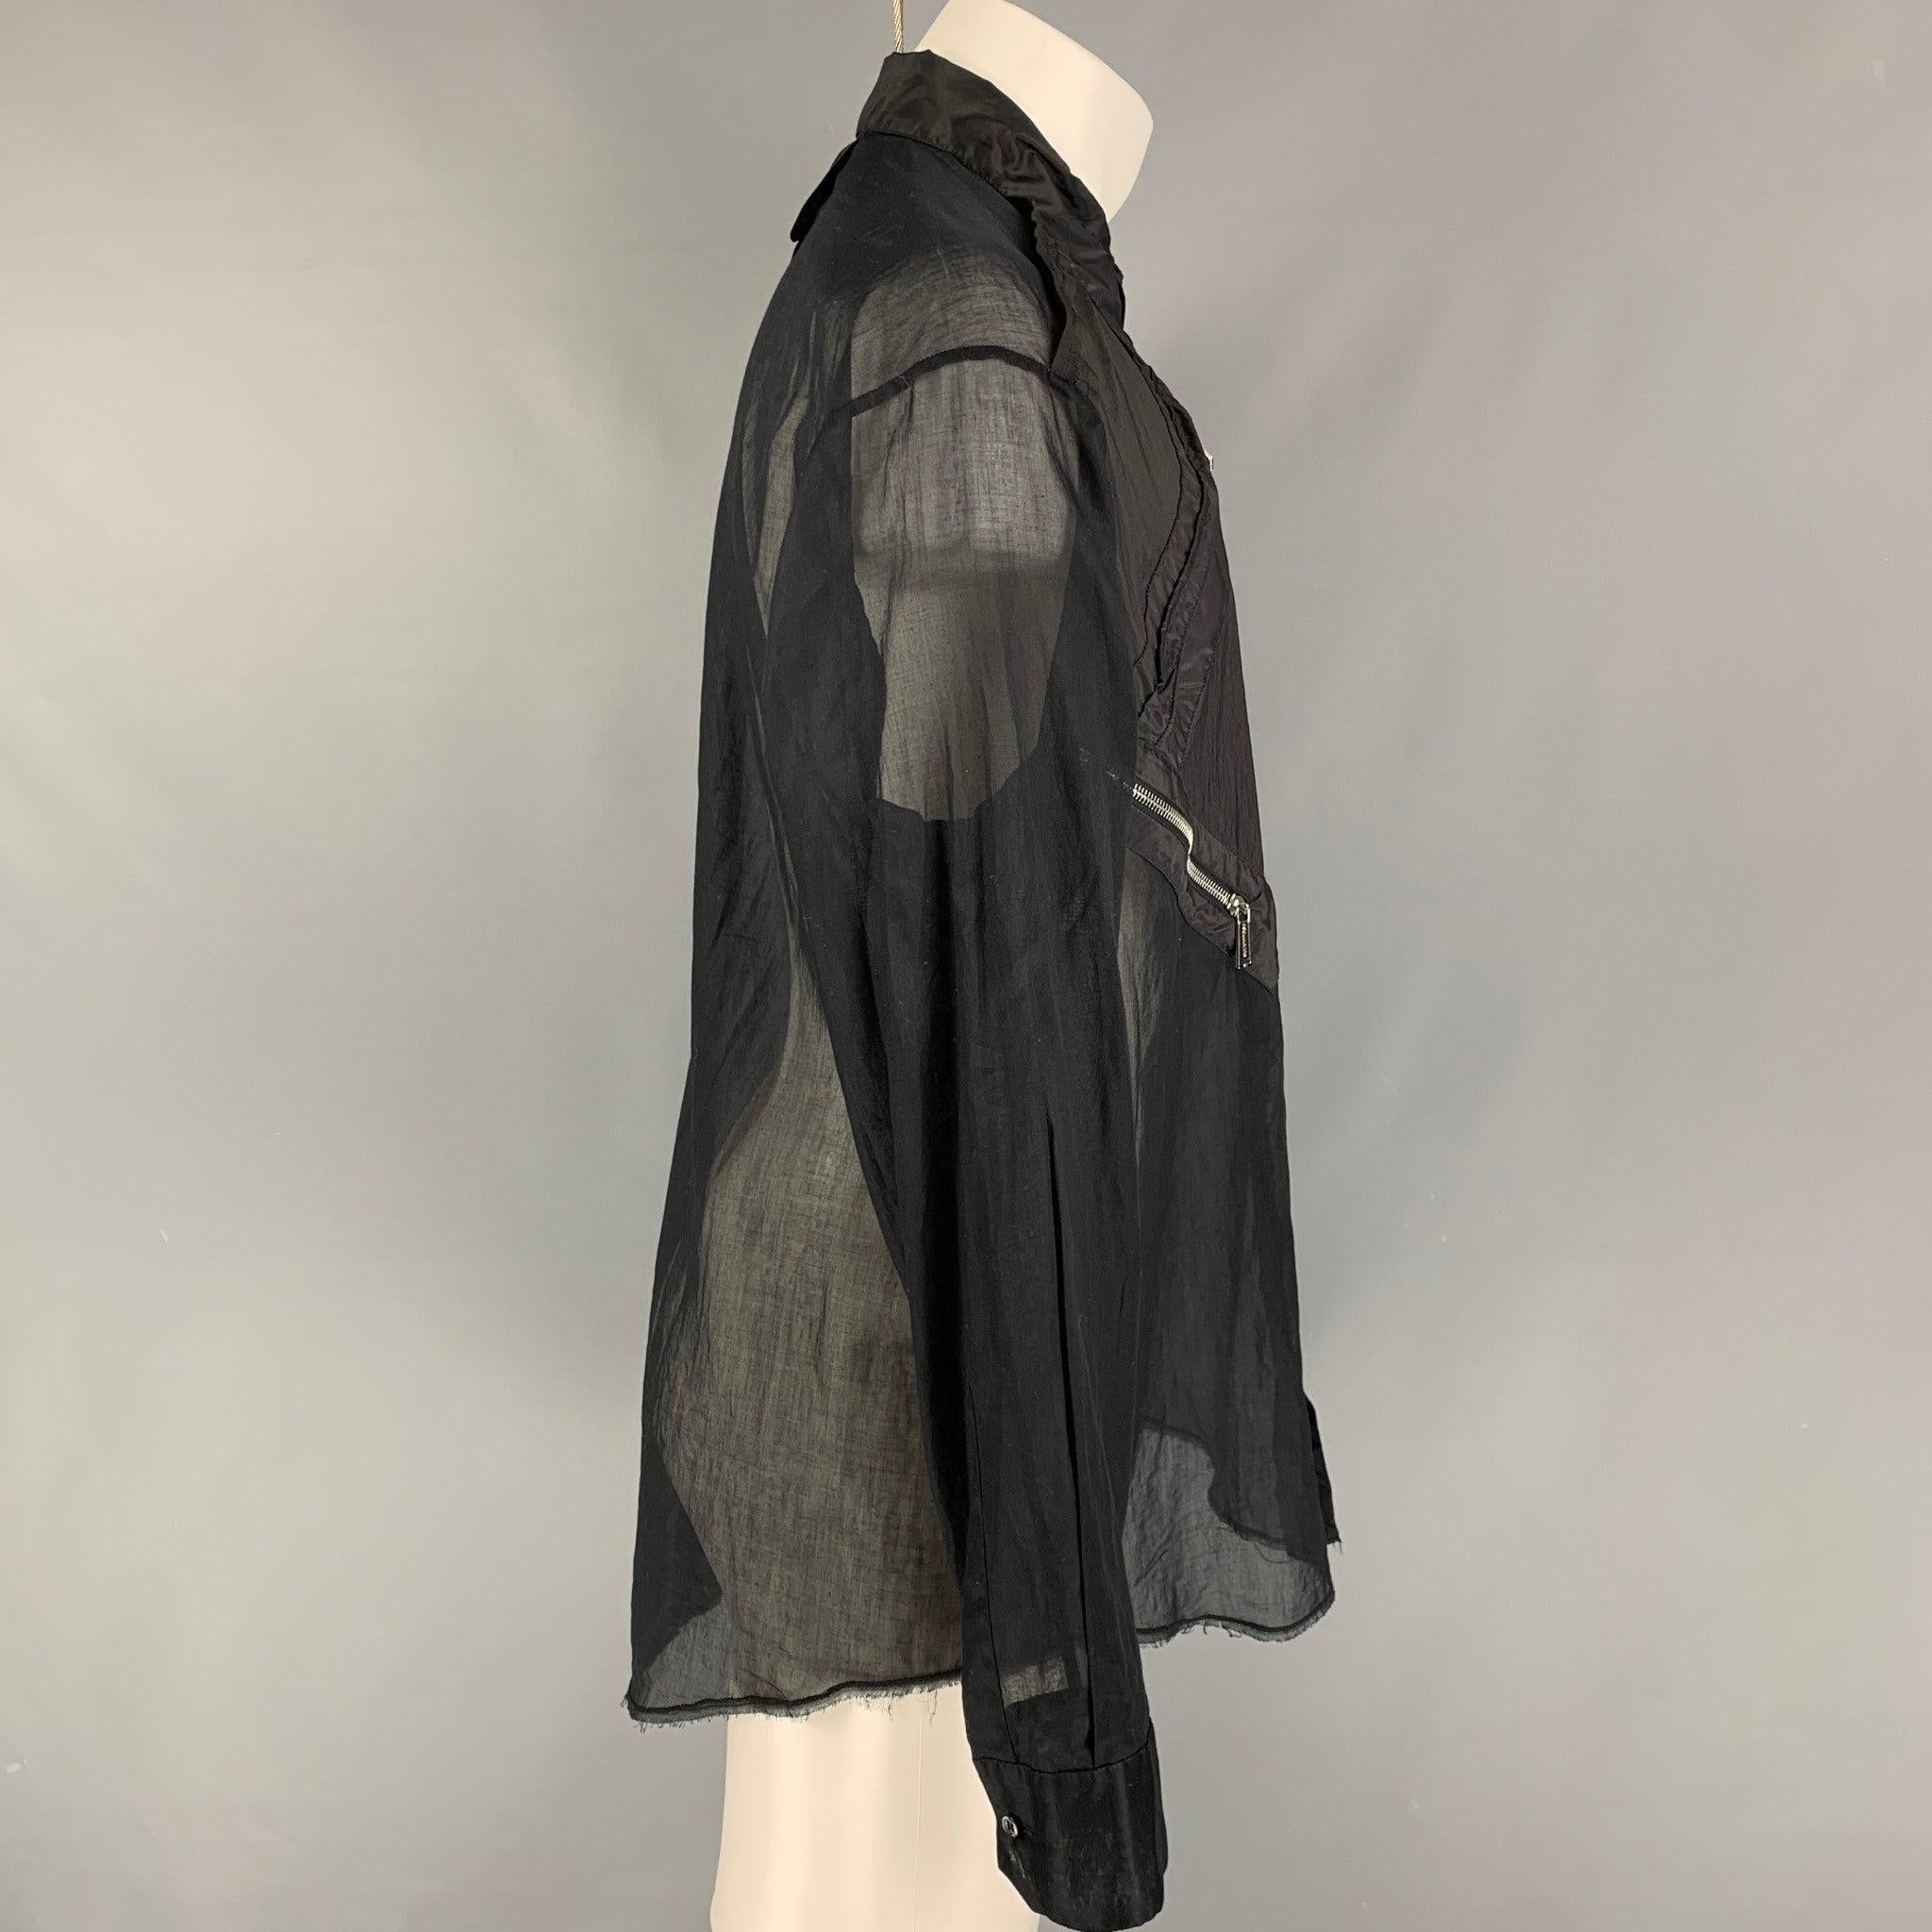 DSQUARED2 long sleeve shirt comes in black cotton fabric with a straight collar, button down front, see through look, and zipper details. Made in Italy.Excellent Pre-Owned Condition. Minor signs of uses. 

Marked:   50 

Measurements: 
 
Shoulder: